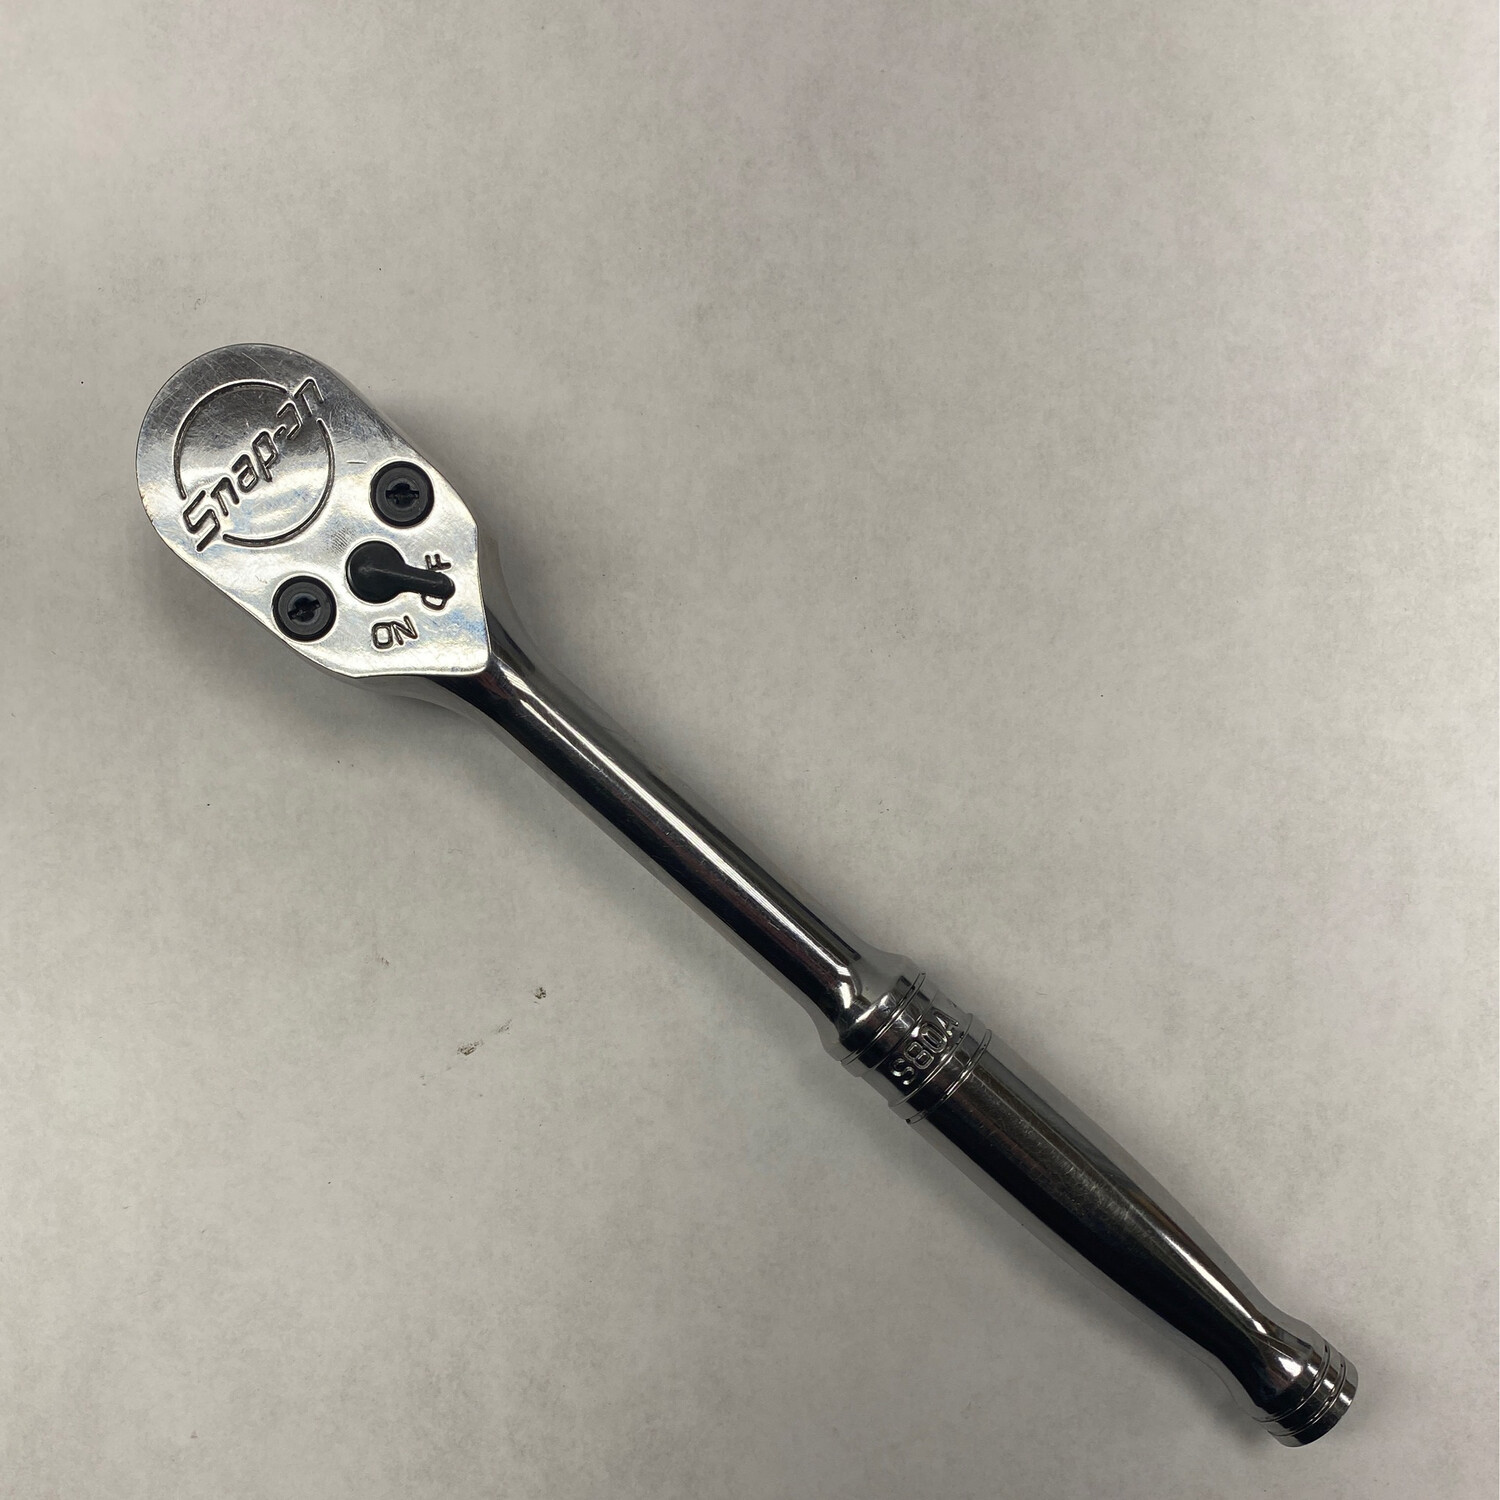 snap on 1 2 inch ratchet